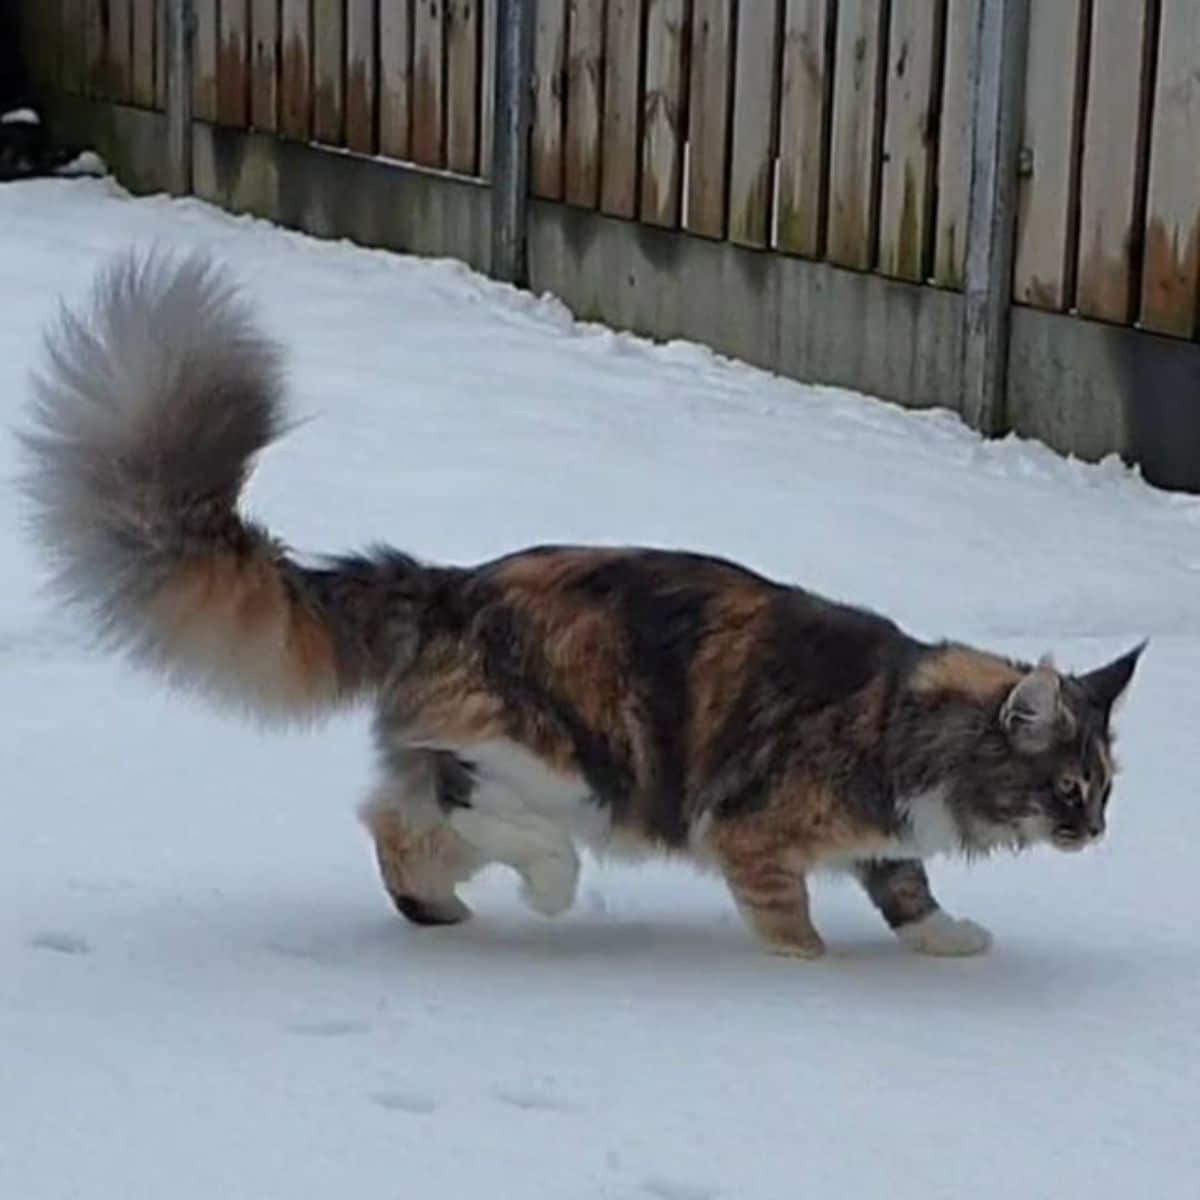 A tortoise maine coon walking on the snow.